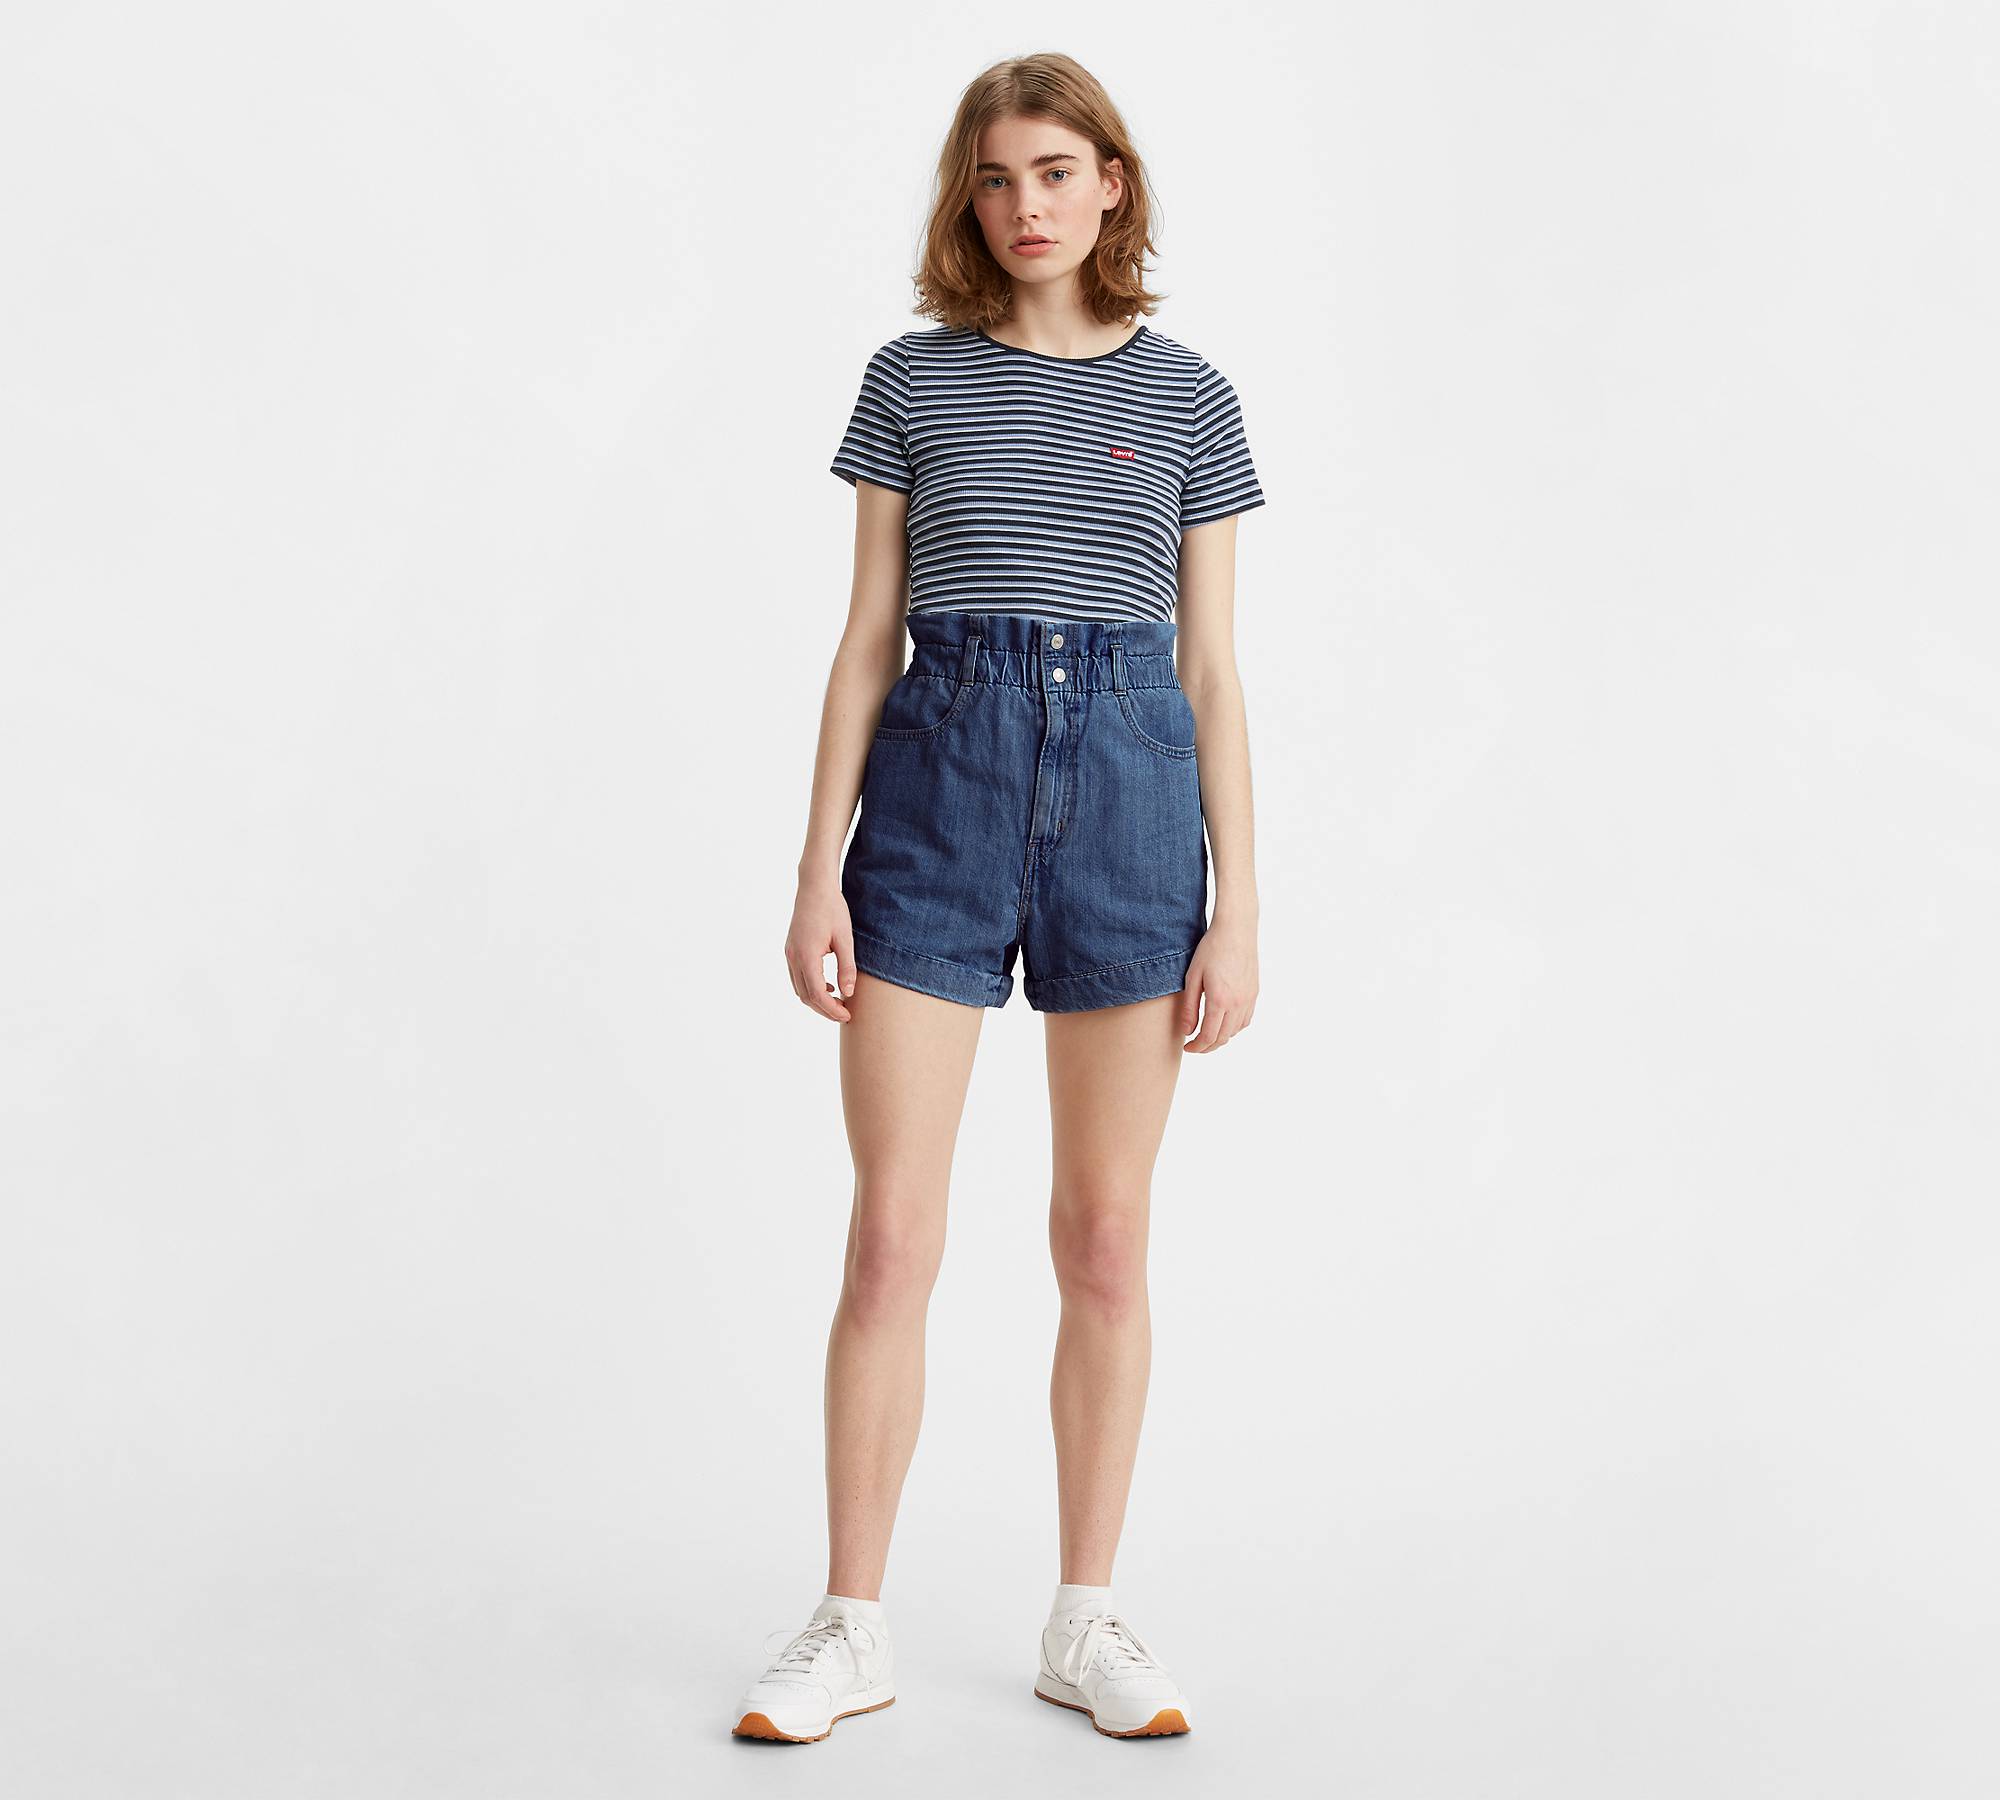 High-Waisted Paperbag Women's Shorts 1